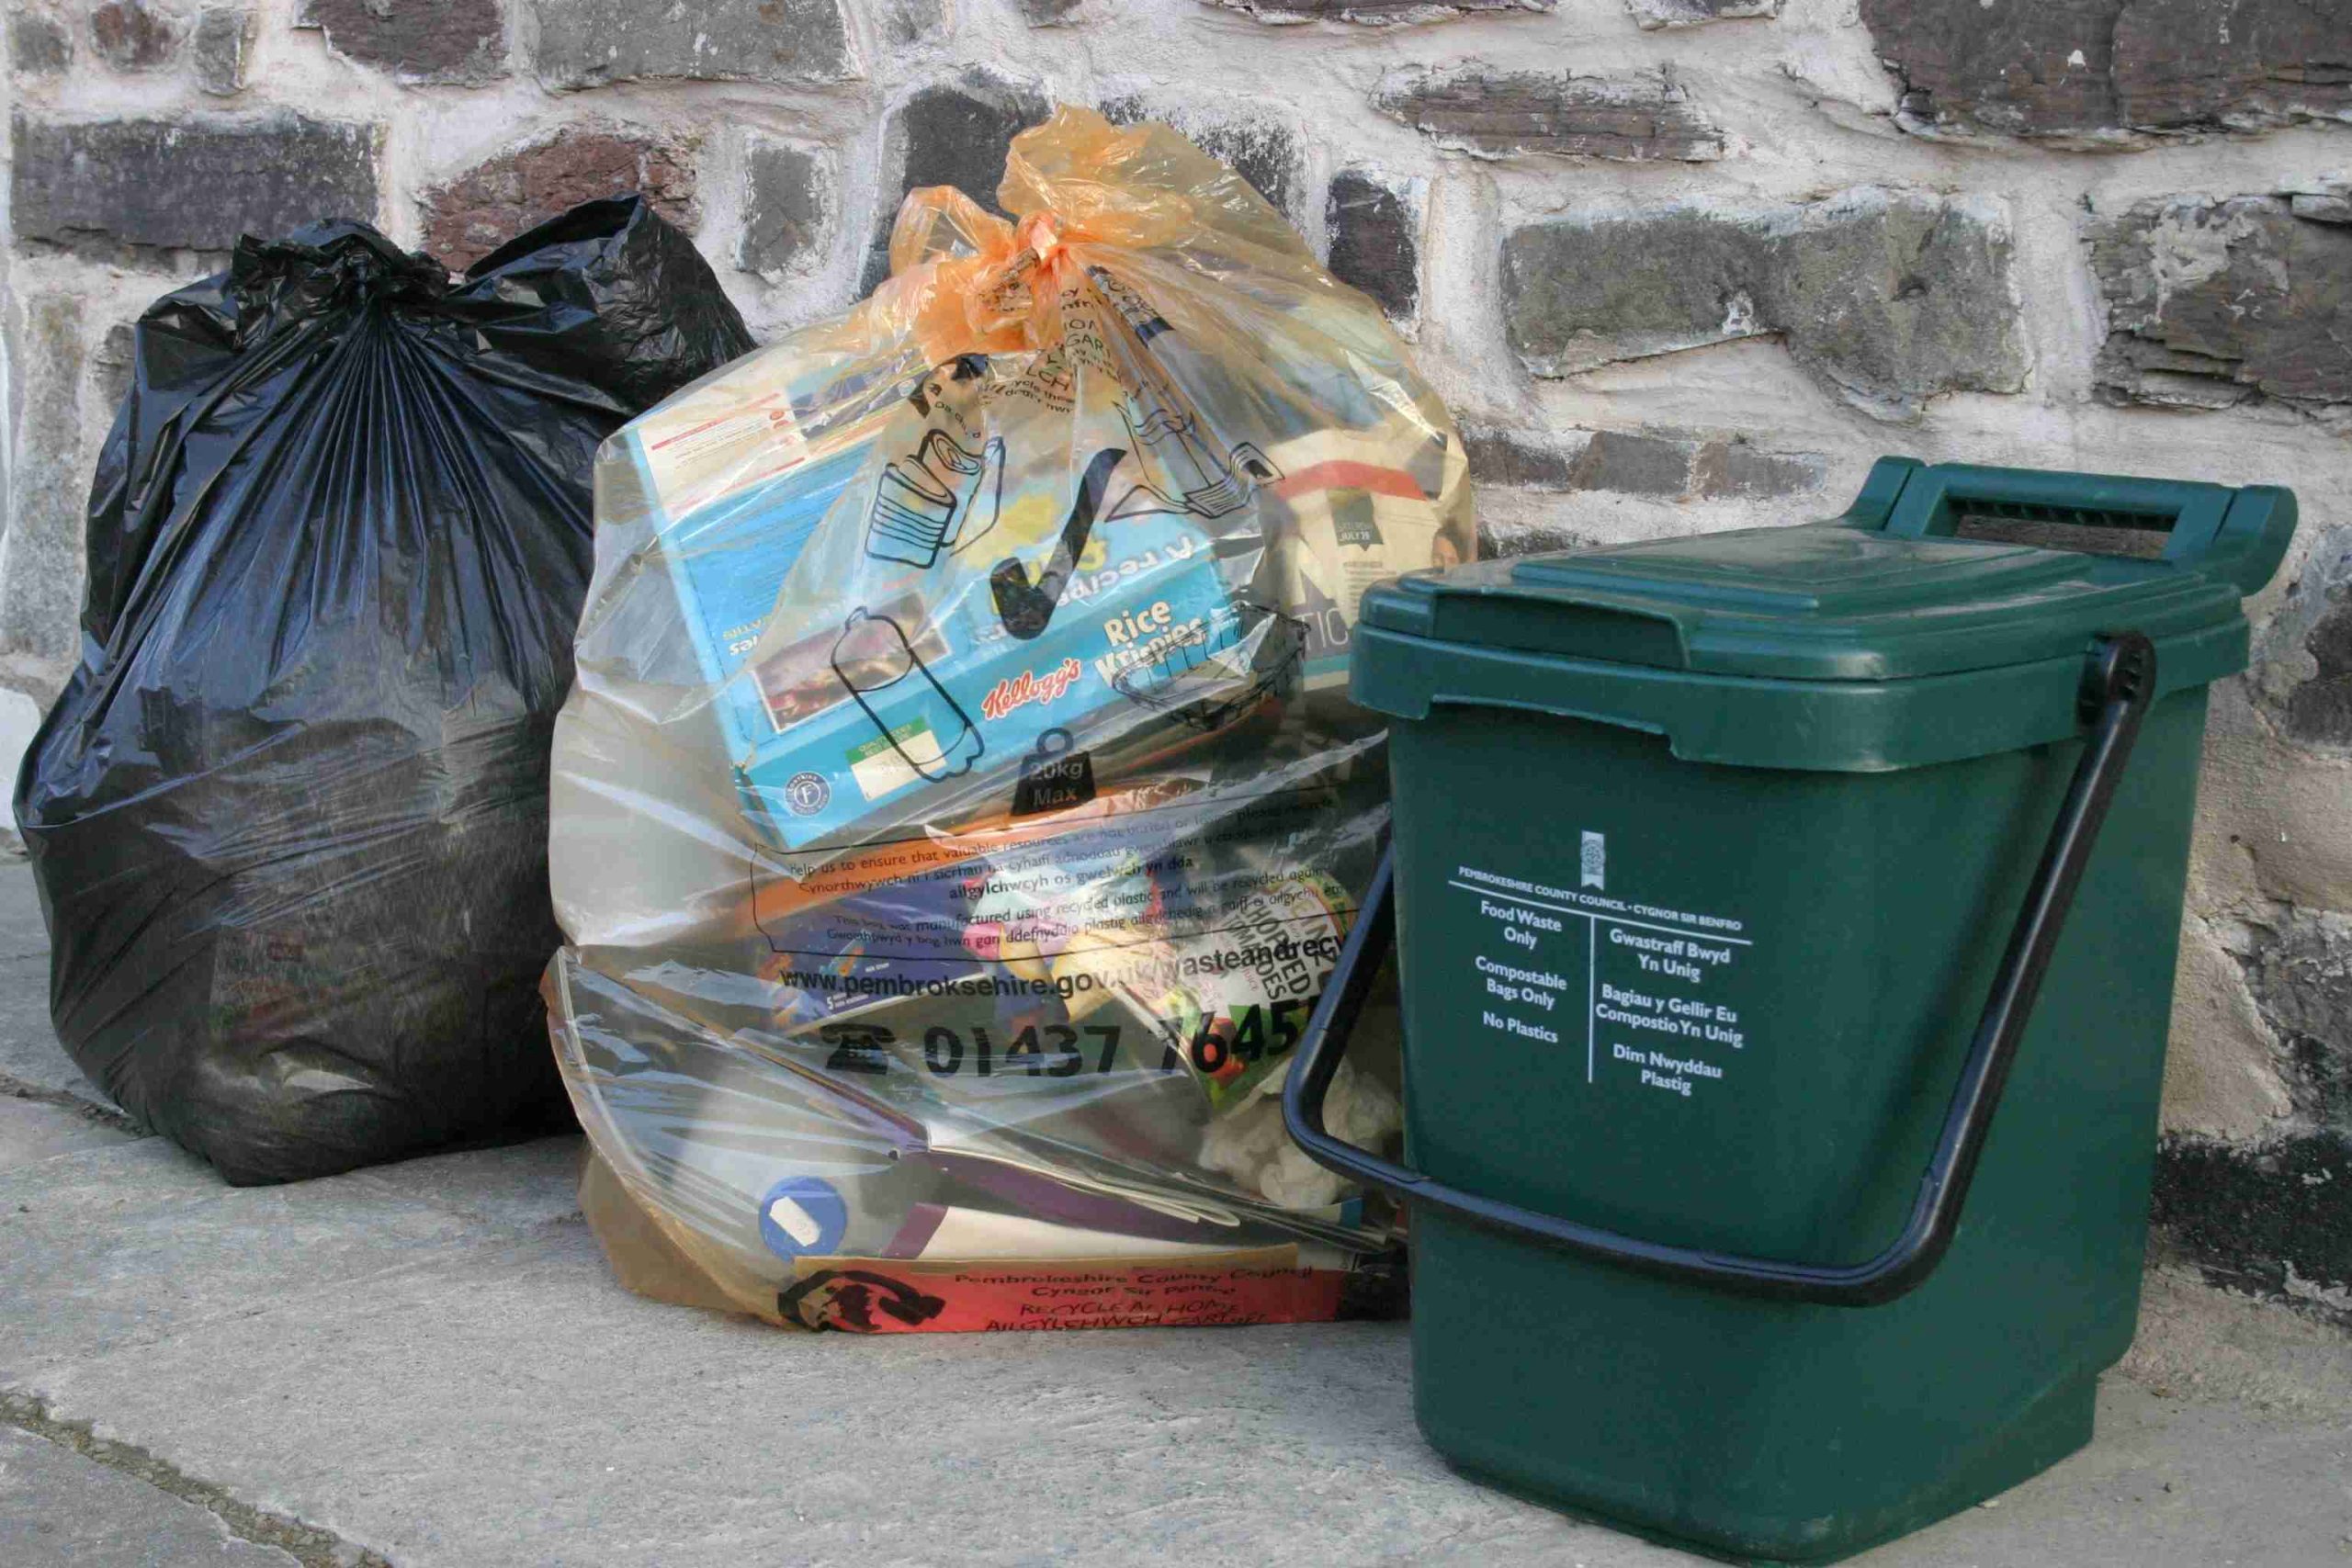 How to Dispose of Home Waste Legally in the UK?